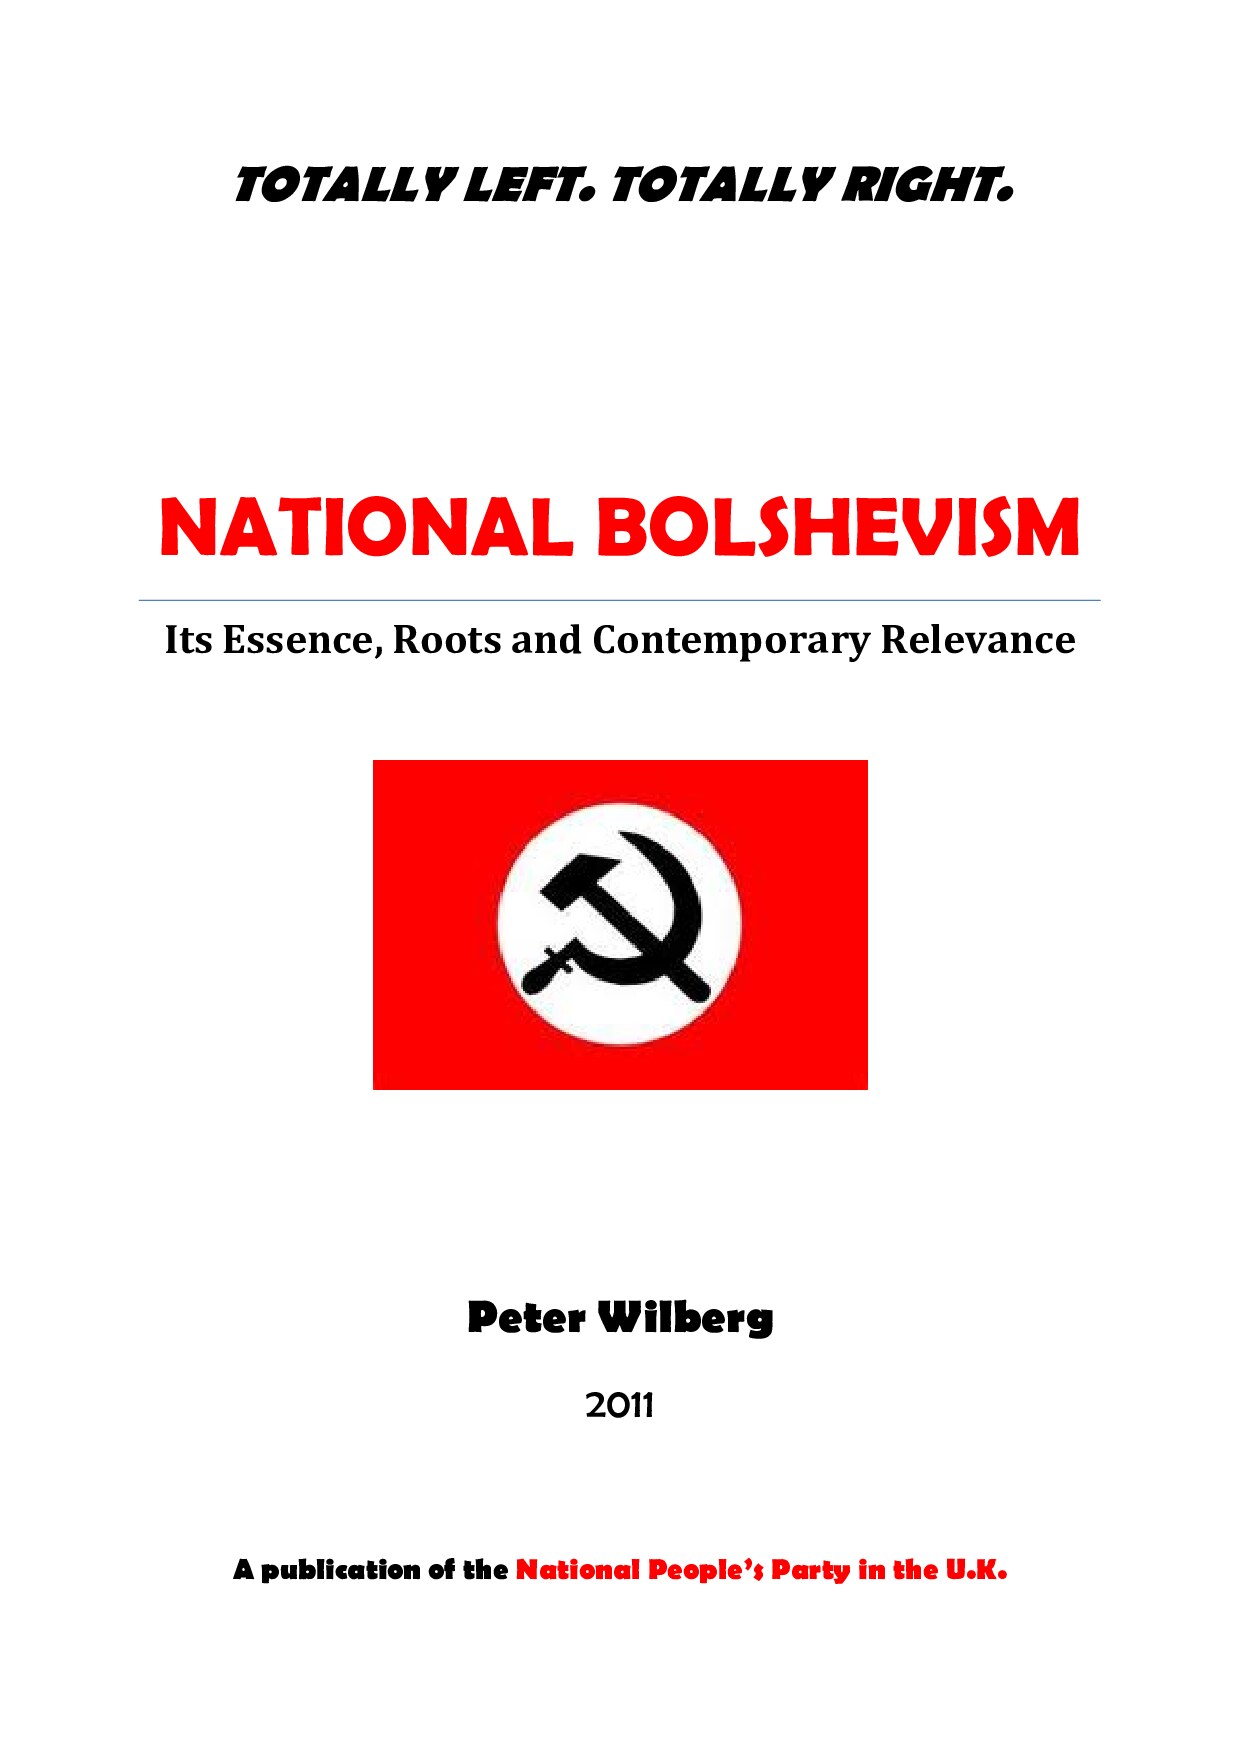 National Bolshevism: Its Essence, Roots and Contemporary Relevance